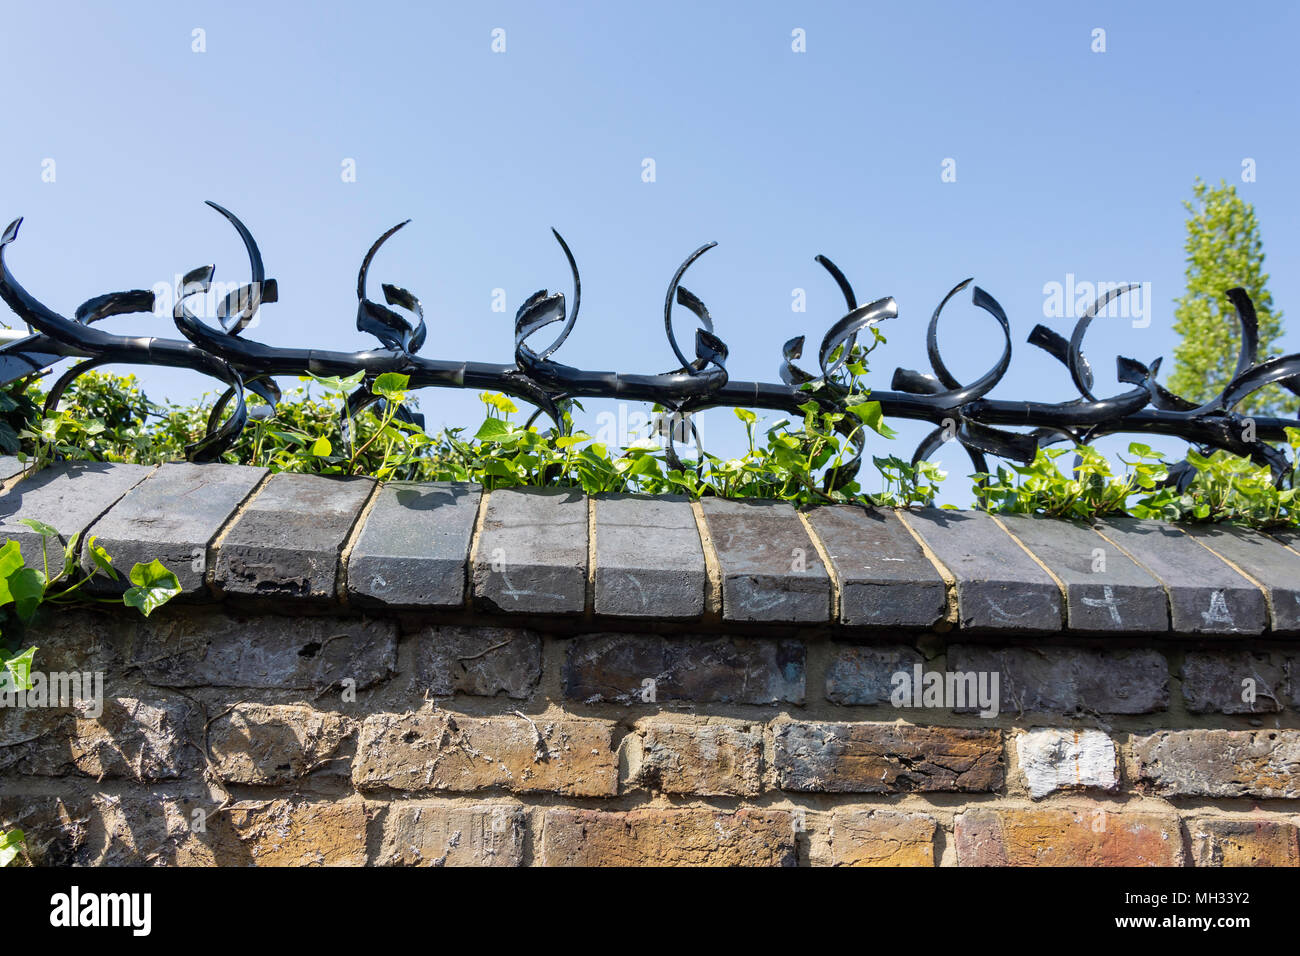 Metal security spikes on garden wall, Chiswick, London Borough of Hounslow, Greater London, England, United Kingdom Stock Photo